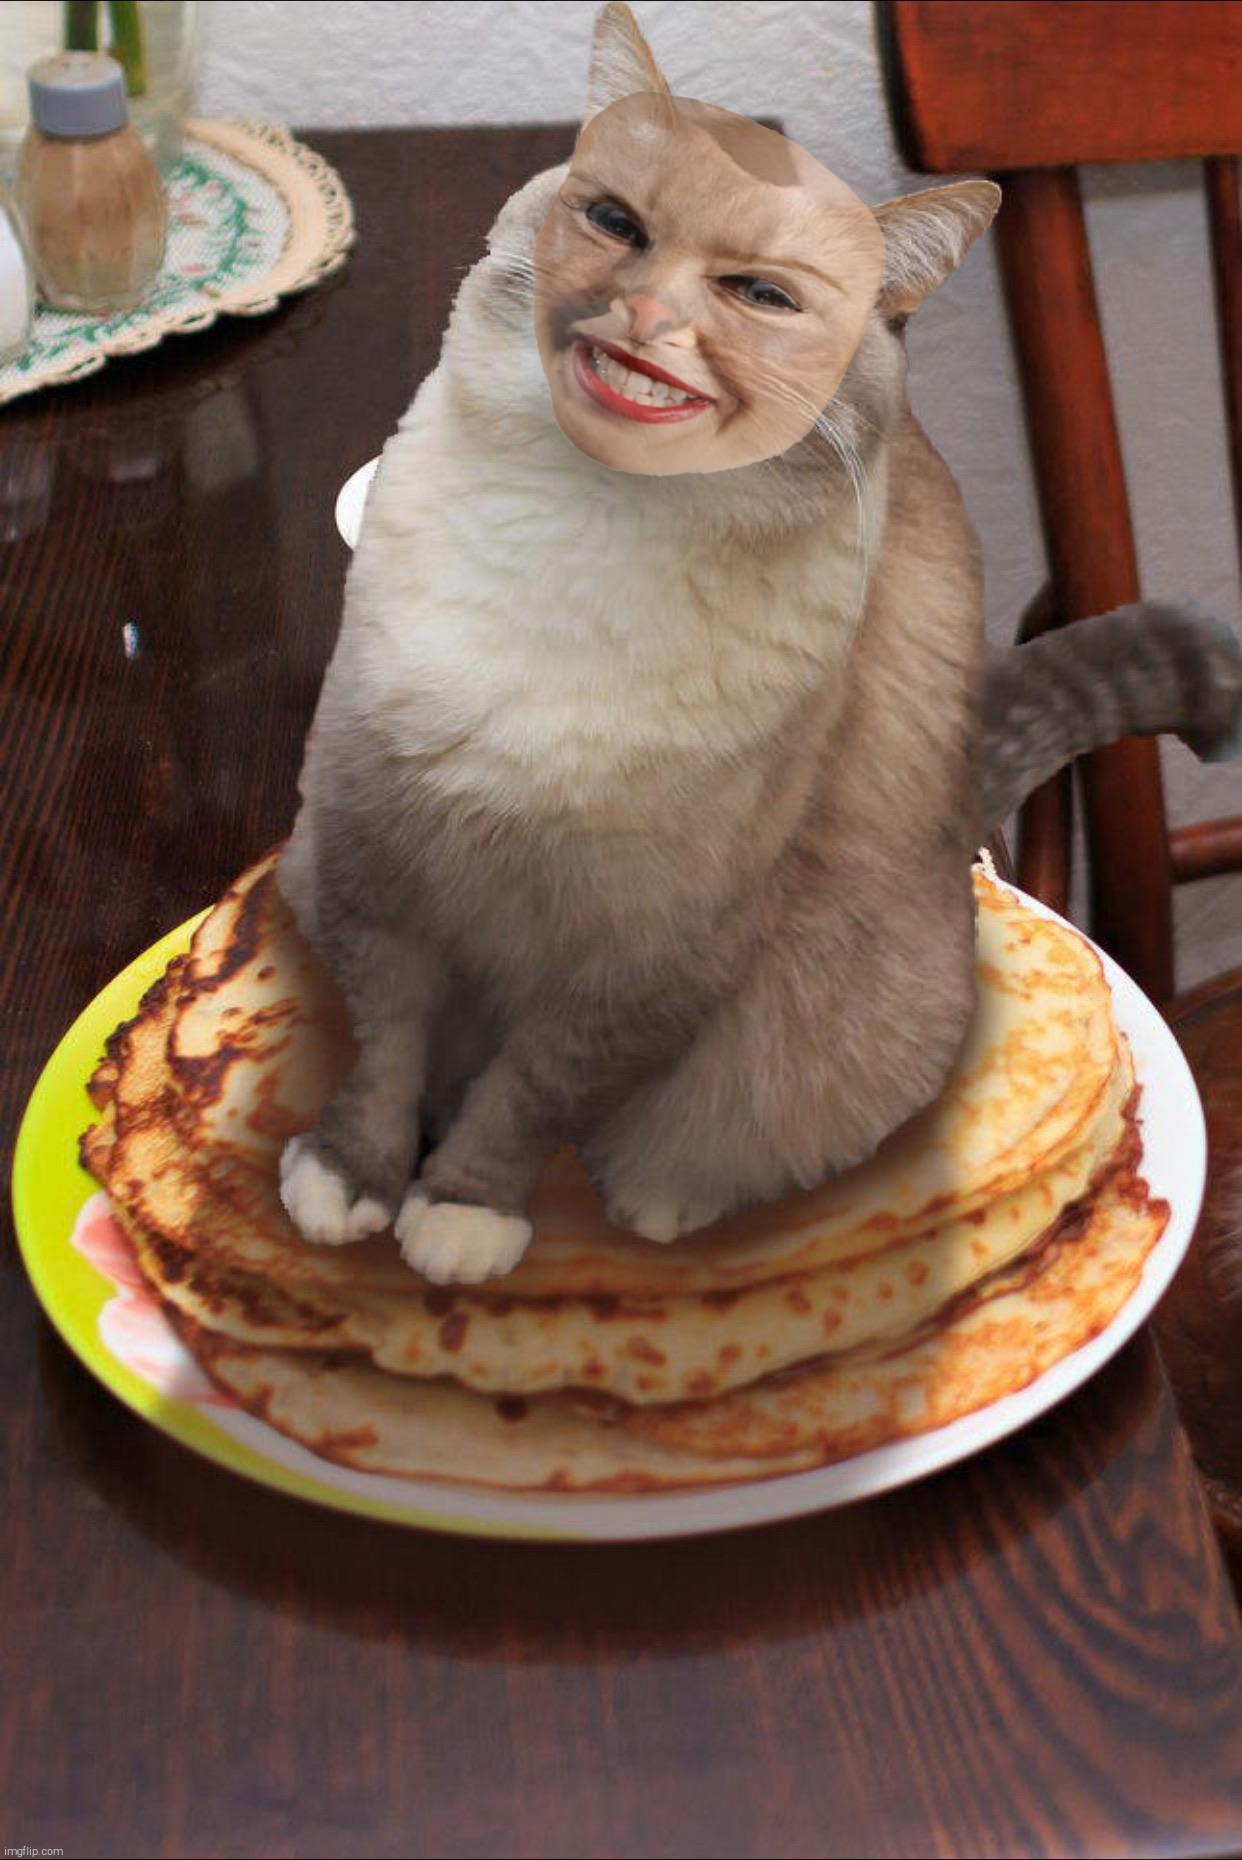 Another fine breakfest ruined by Kyttie (see what I did there?) Minogue,,, | image tagged in pancake cat,kylie botox mask,cats are stupid,kylie minogue,kylieminoguesucks,kylie minogue screech | made w/ Imgflip meme maker